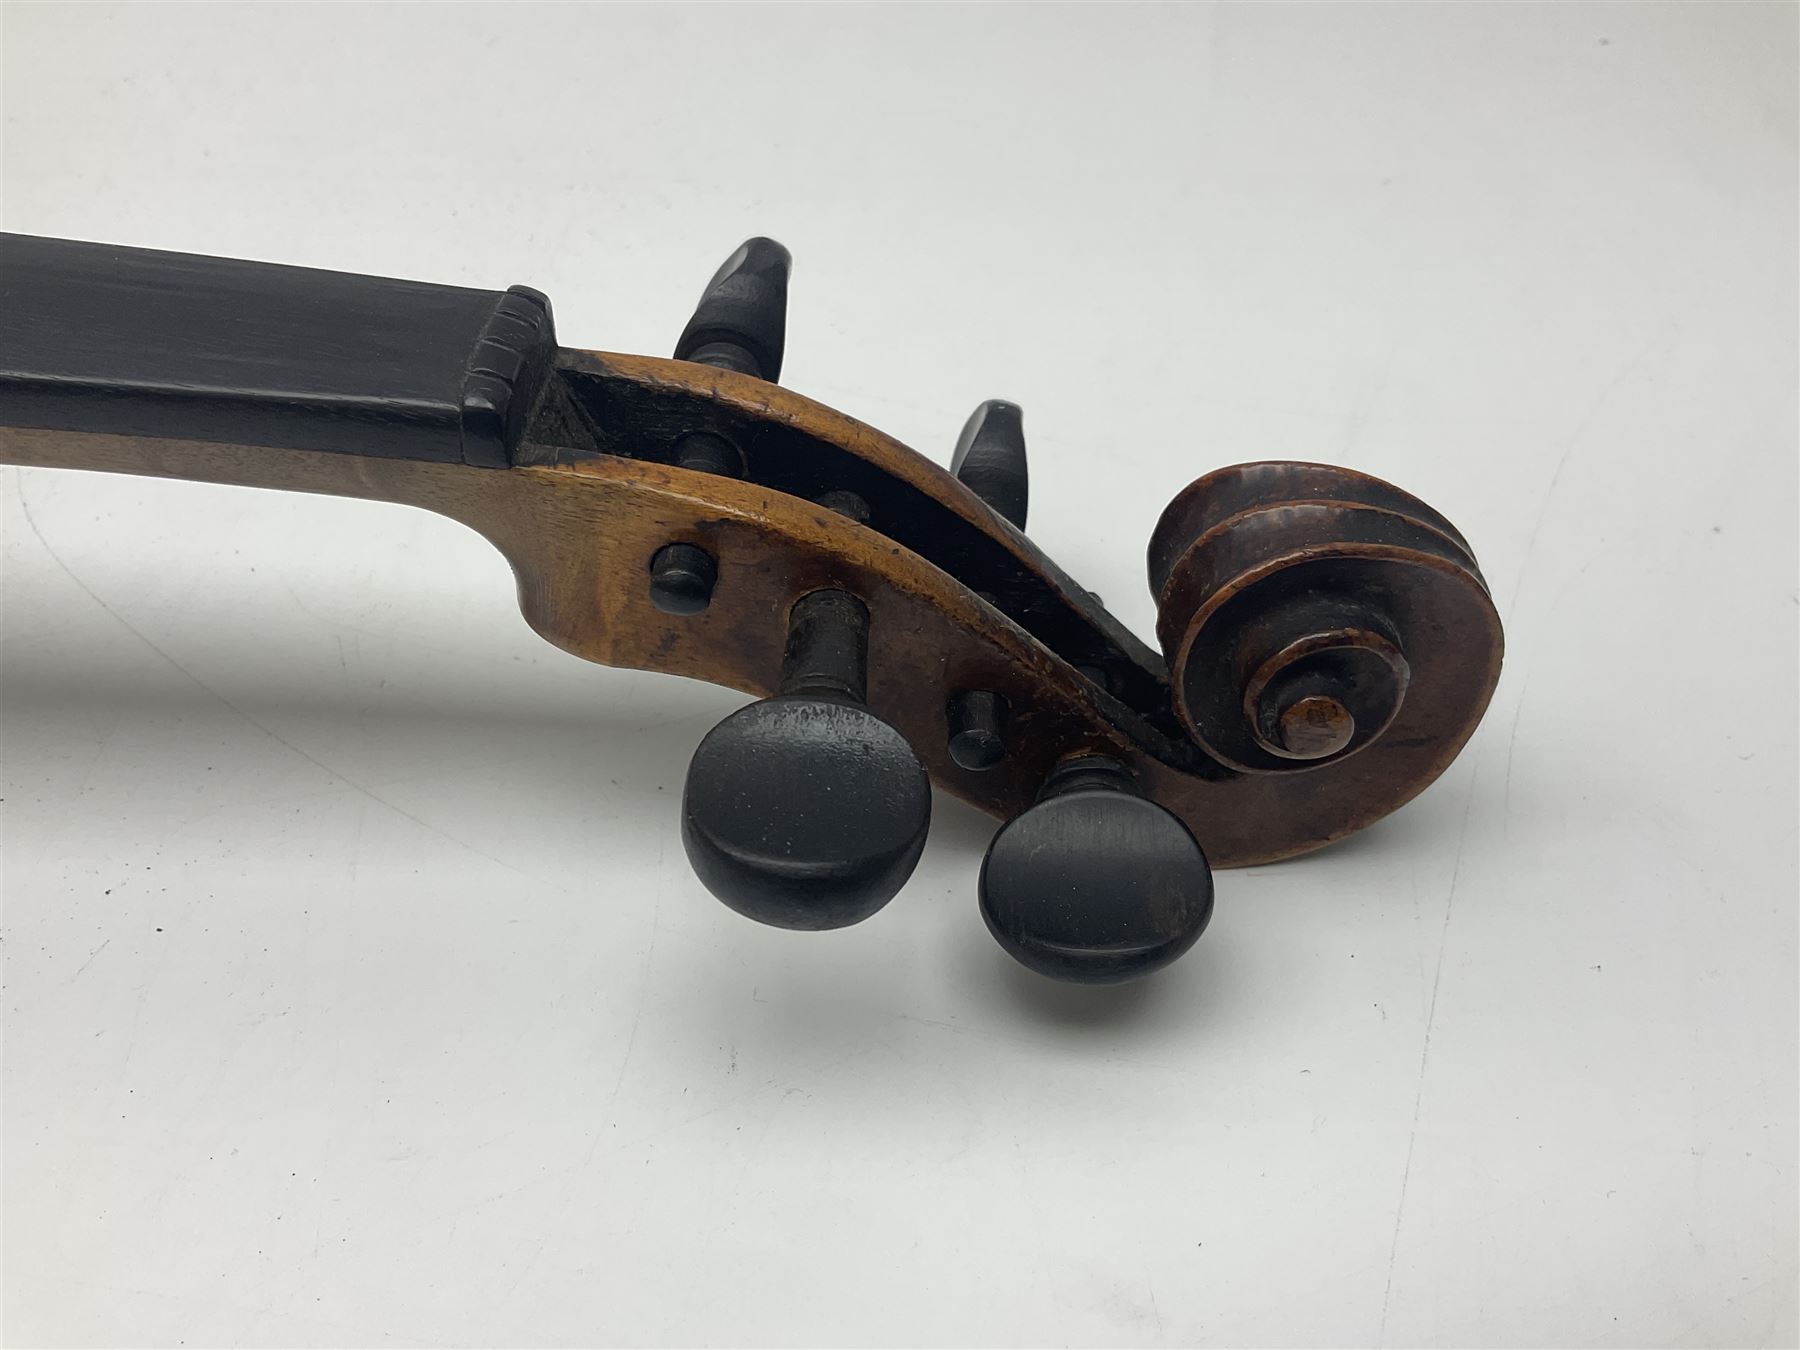 Late 19th century German trade violin c1890 with 36cm two-piece birds-eye maple back - Image 12 of 17